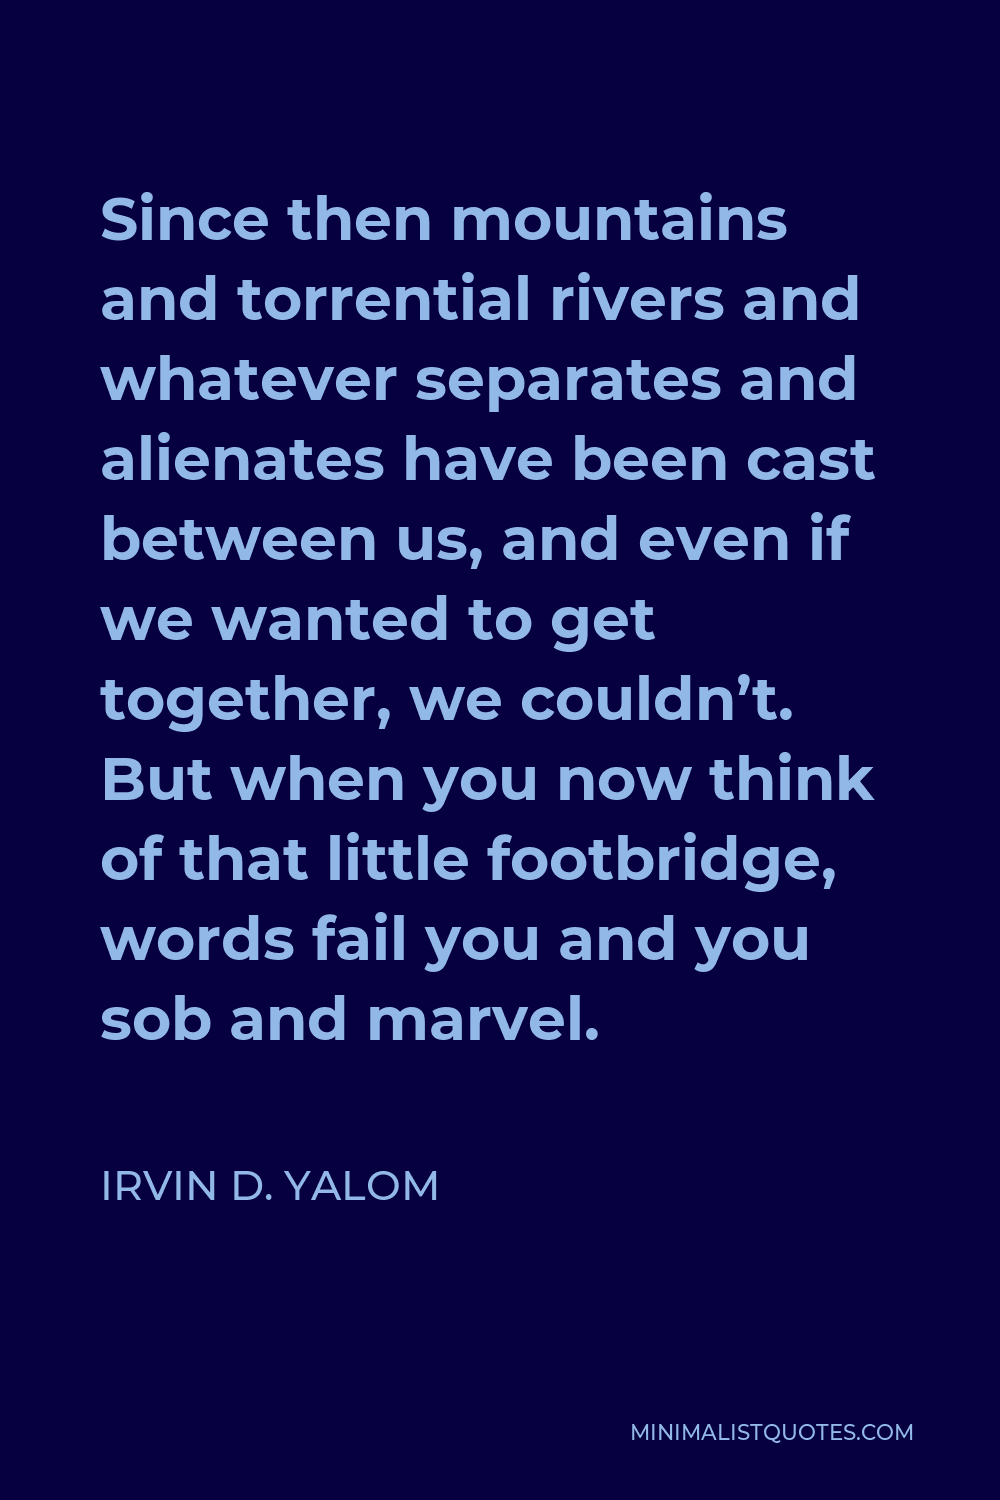 Irvin D. Yalom Quote - Since then mountains and torrential rivers and whatever separates and alienates have been cast between us, and even if we wanted to get together, we couldn’t. But when you now think of that little footbridge, words fail you and you sob and marvel.